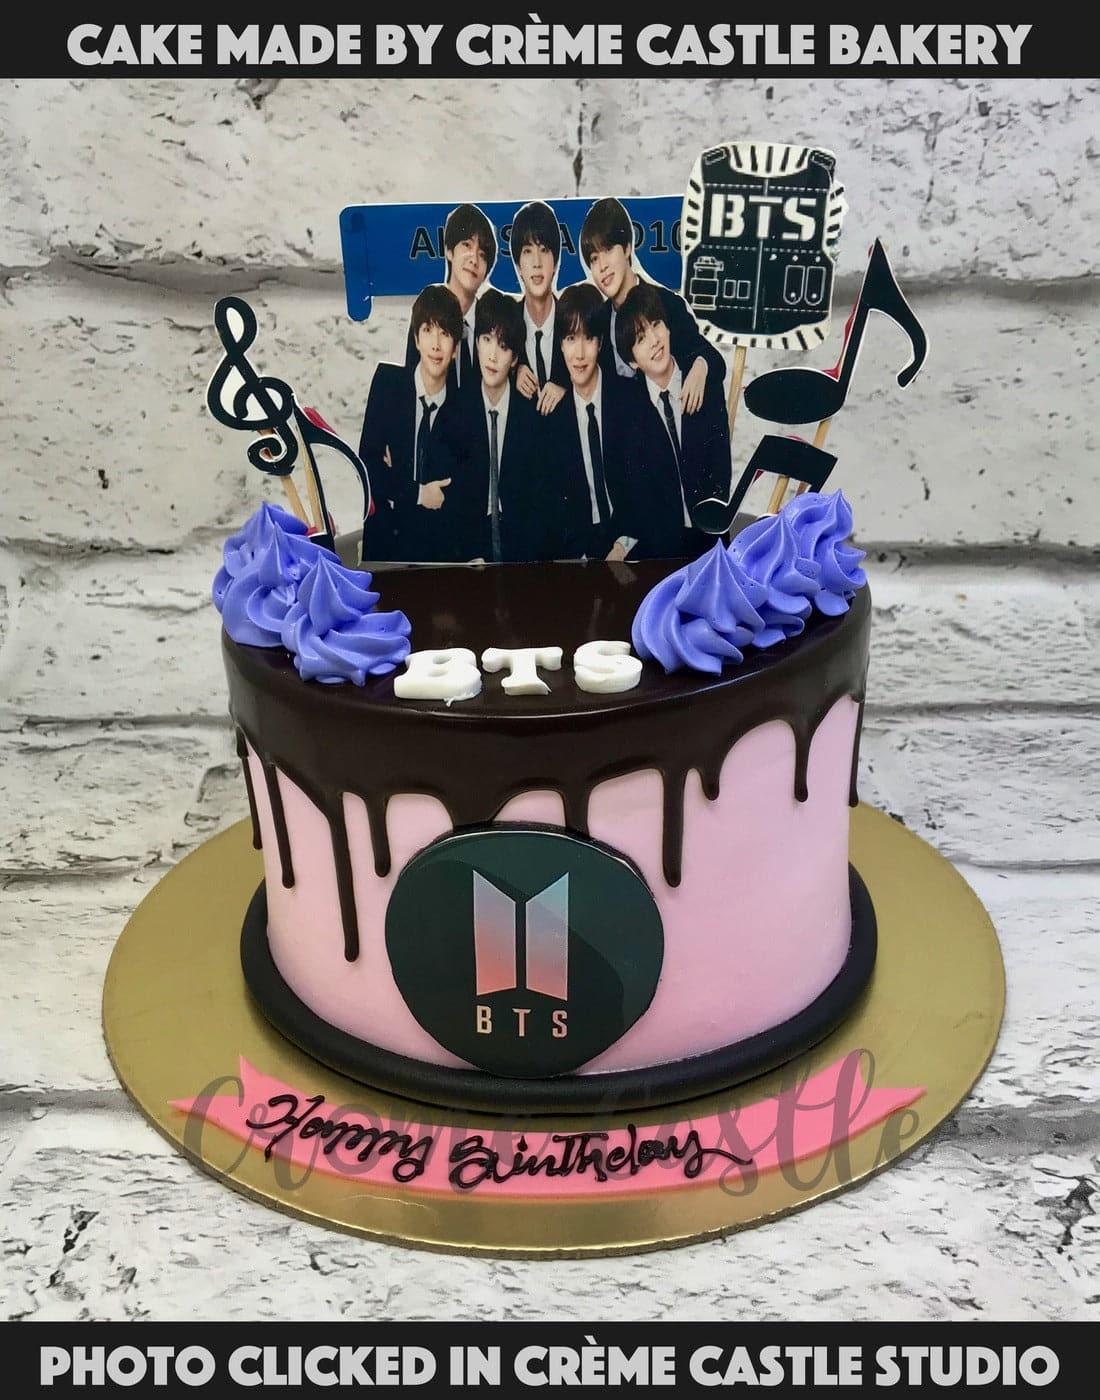 Top 17 Delicious BTS Cake Ideas Online For This Season